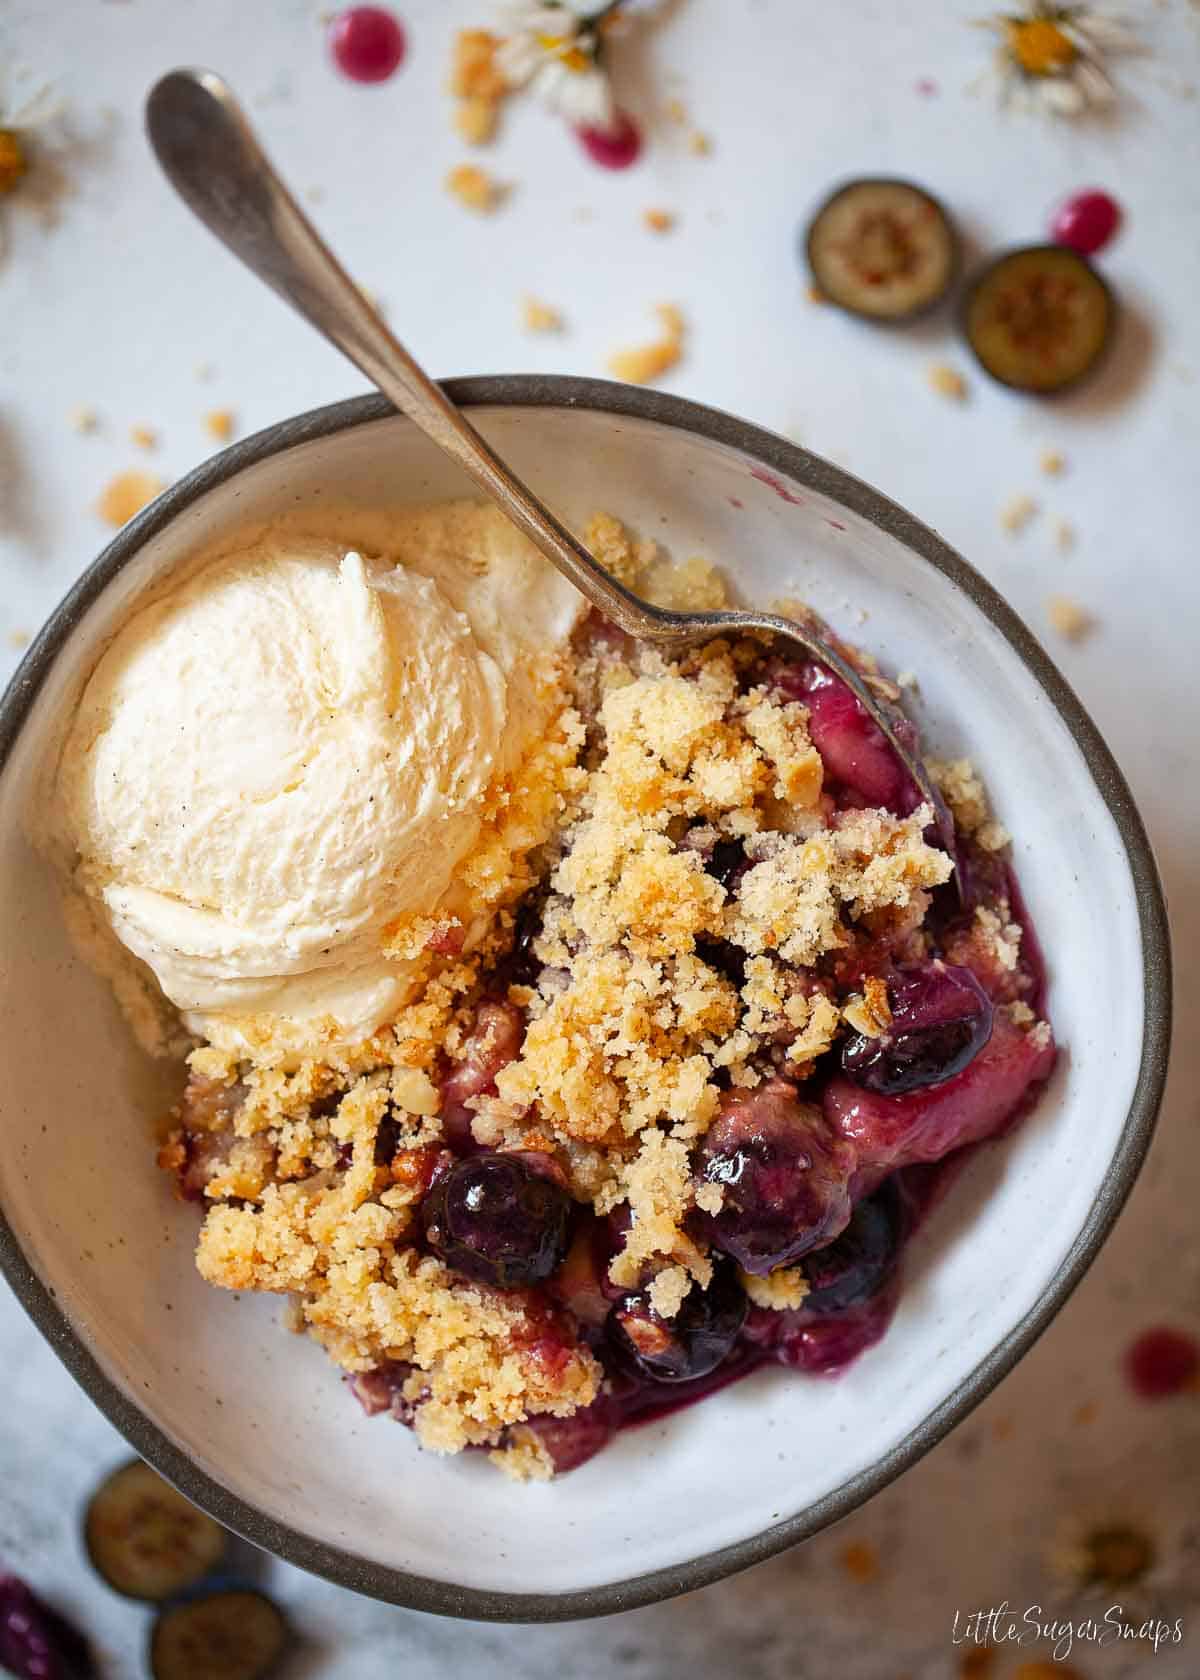 Apple and Blueberry crumble in a bowl with a scoop of ice cream.